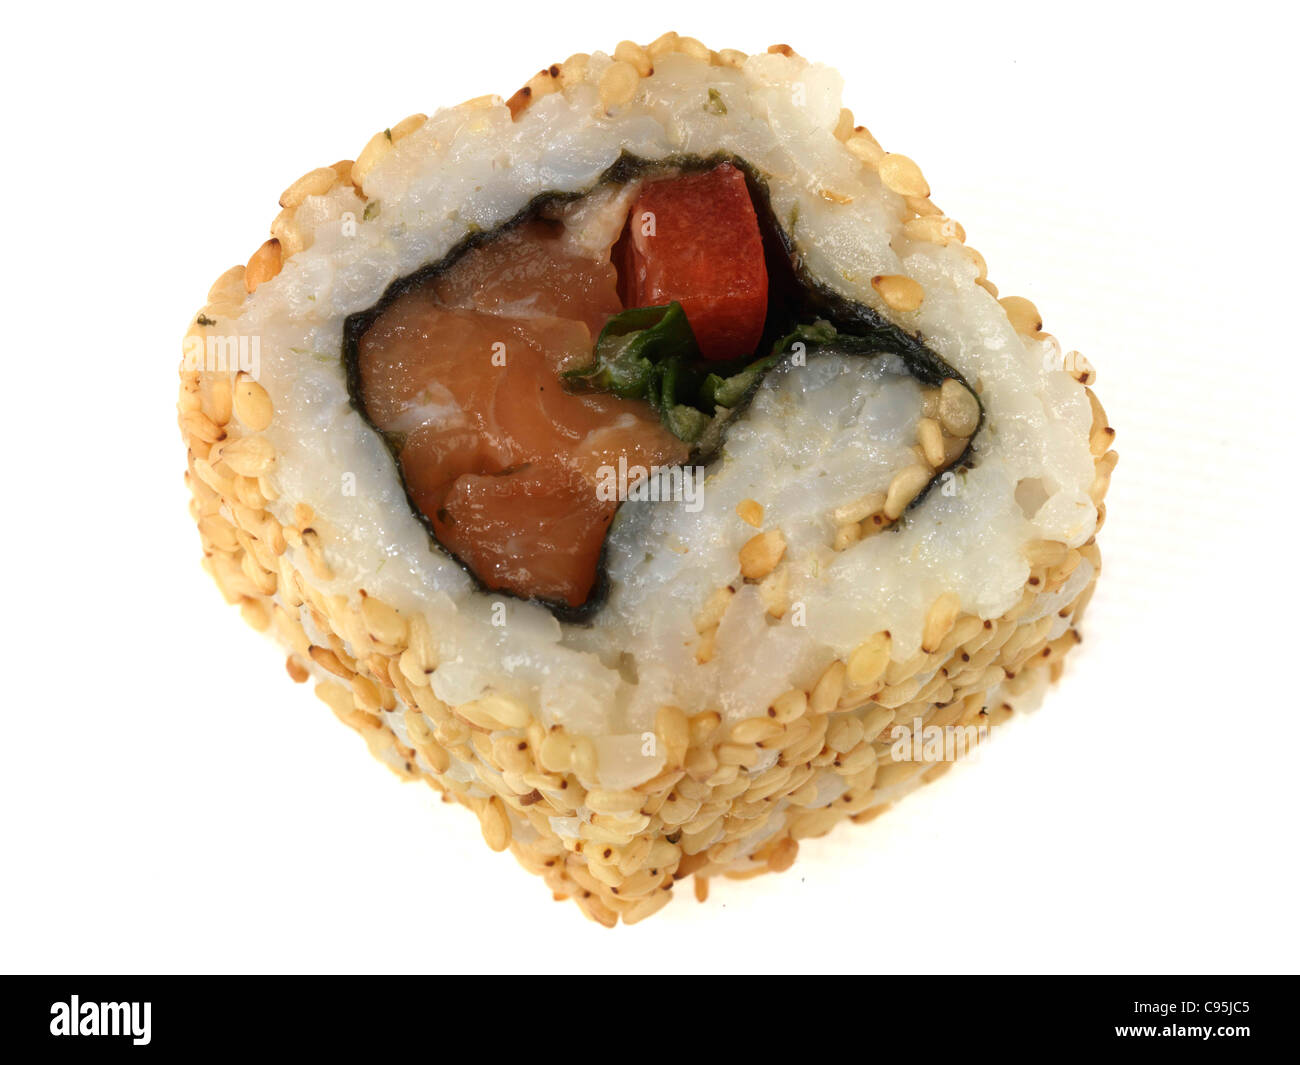 Freshly Prepared Salmon Sushi With Sticky Rice And Sesame Seeds Against A White Background With A Clipping Path And No People Stock Photo